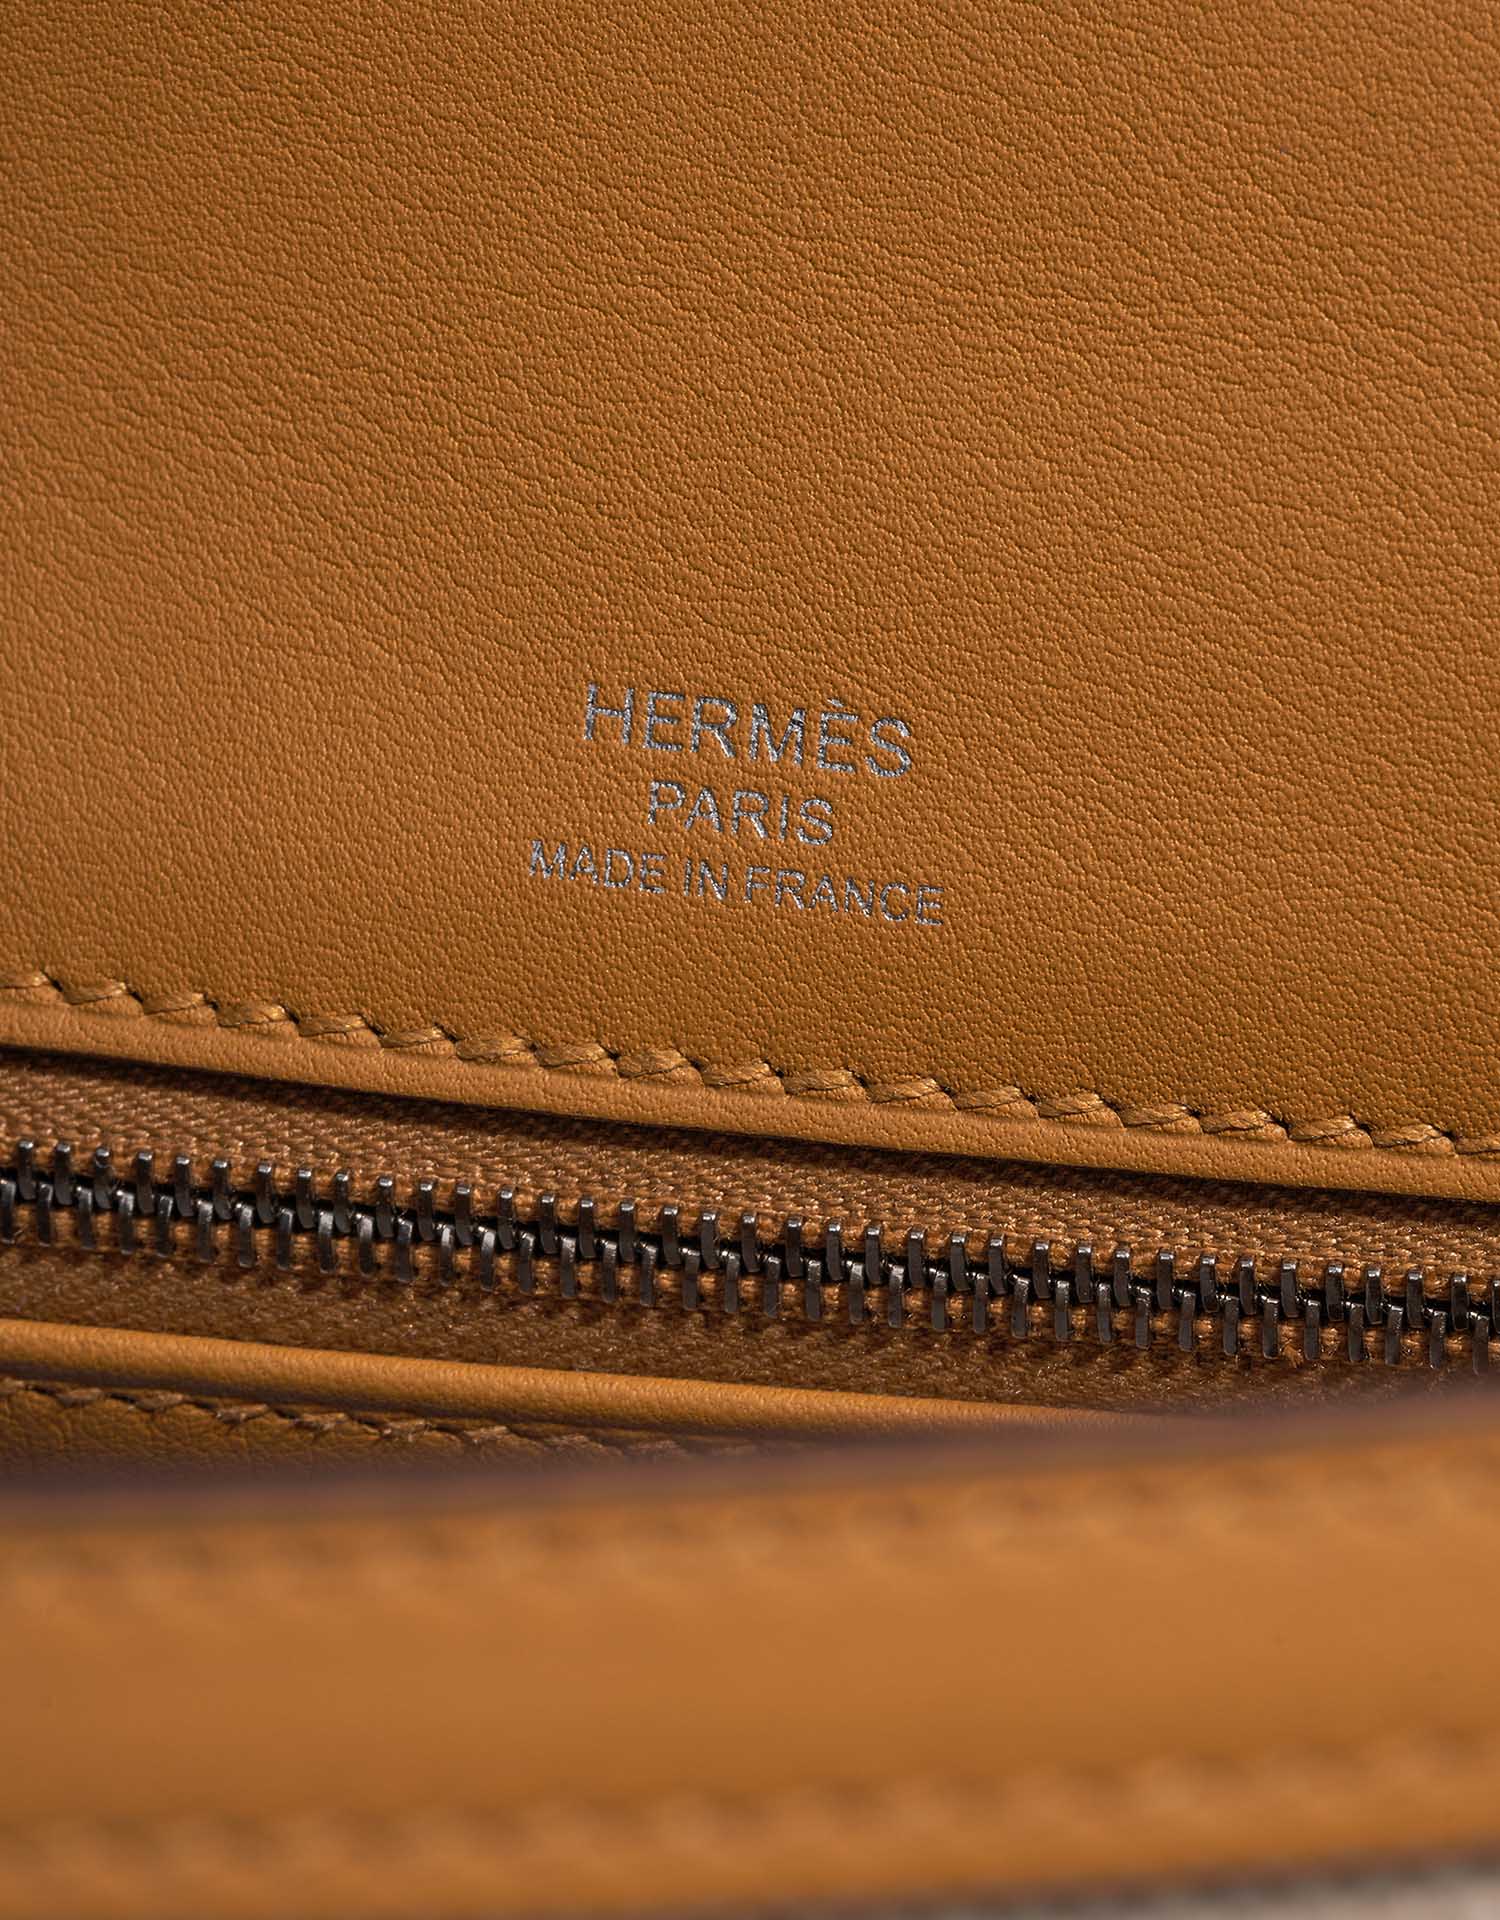 Quick Bag Reveal / Hermes Kelly Toile ❤️ 